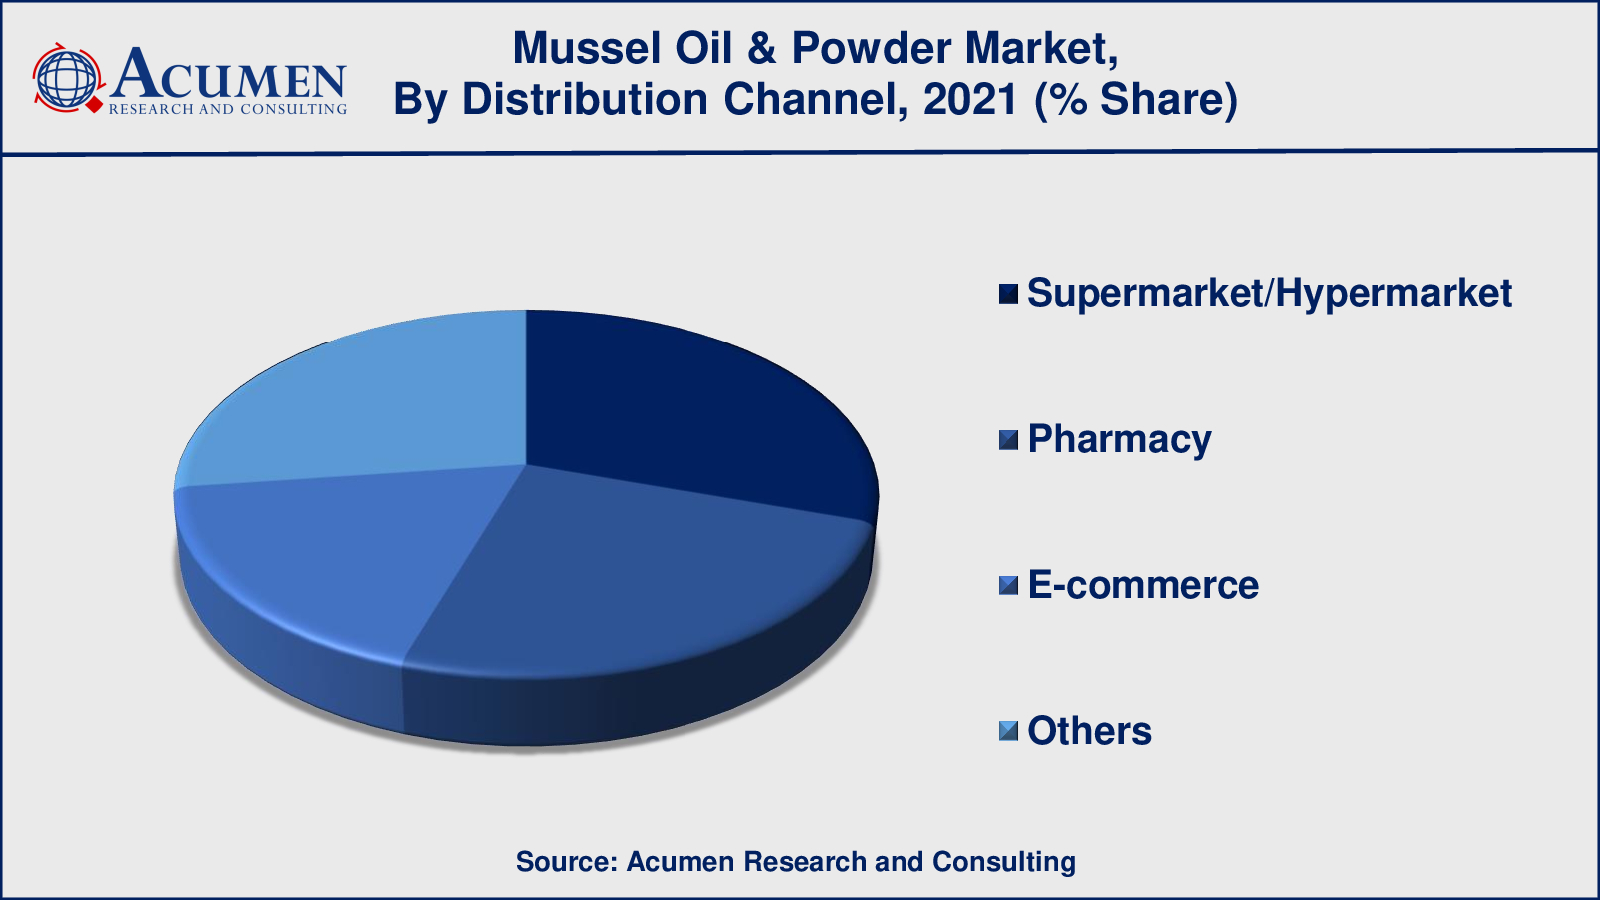 Mussel Oil & Powder Market Analysis accounted for USD 166 Million in 2021 and is estimated to reach USD 258 Million by 2030.